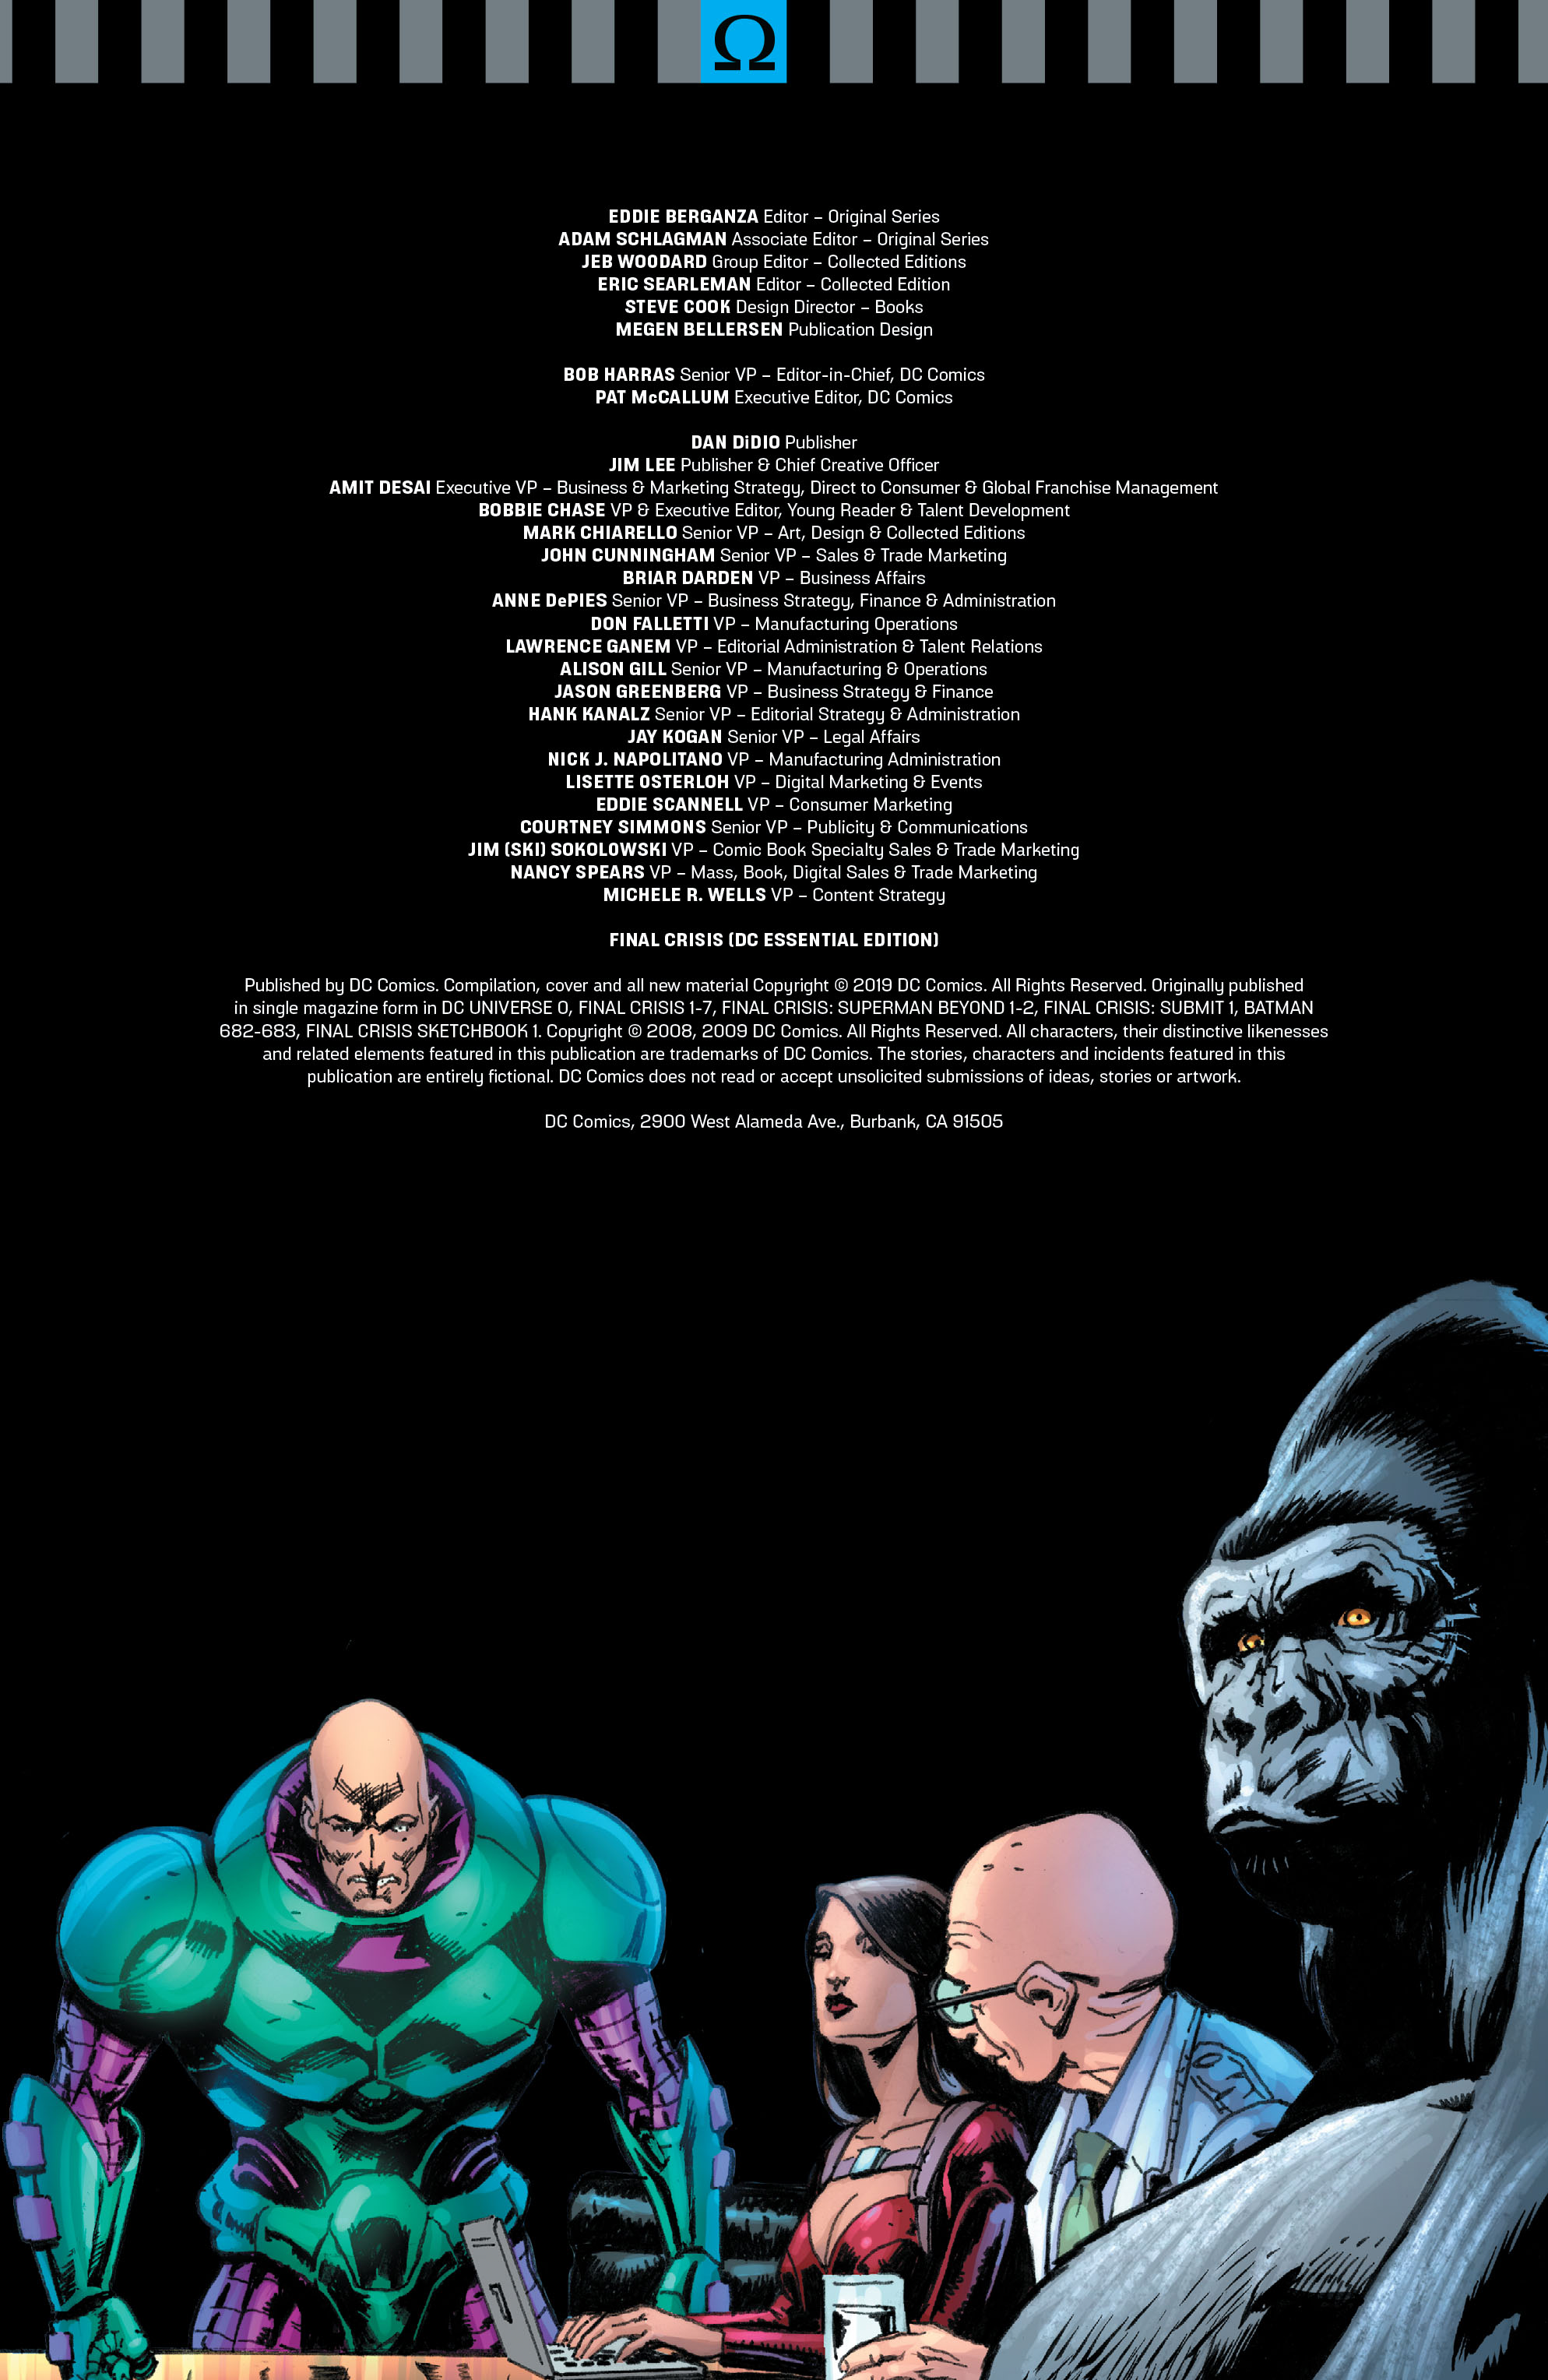 Read online Final Crisis (DC Essential Edition) comic -  Issue # TPB (Part 1) - 5